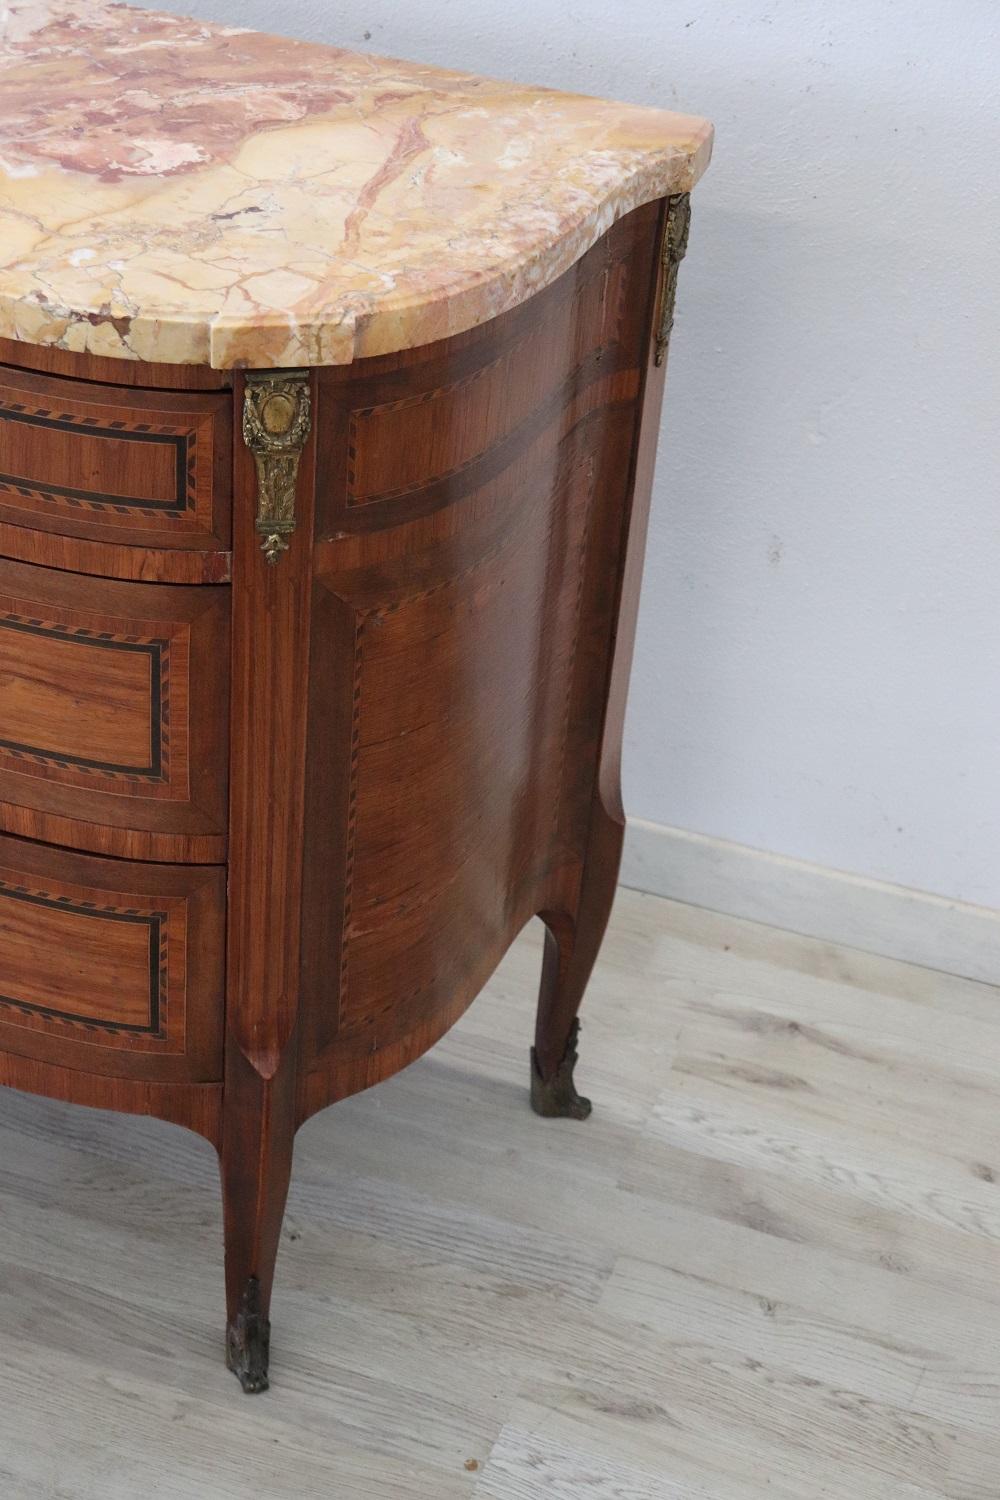 Spectacular 1880s French antique commode in precious inlaid walnut marquetry. The line is typical of the Napoleon III with elegant wavy legs. Rich decoration in finely chiseled bronze makes. The front with three comfortable drawers. The top in fine